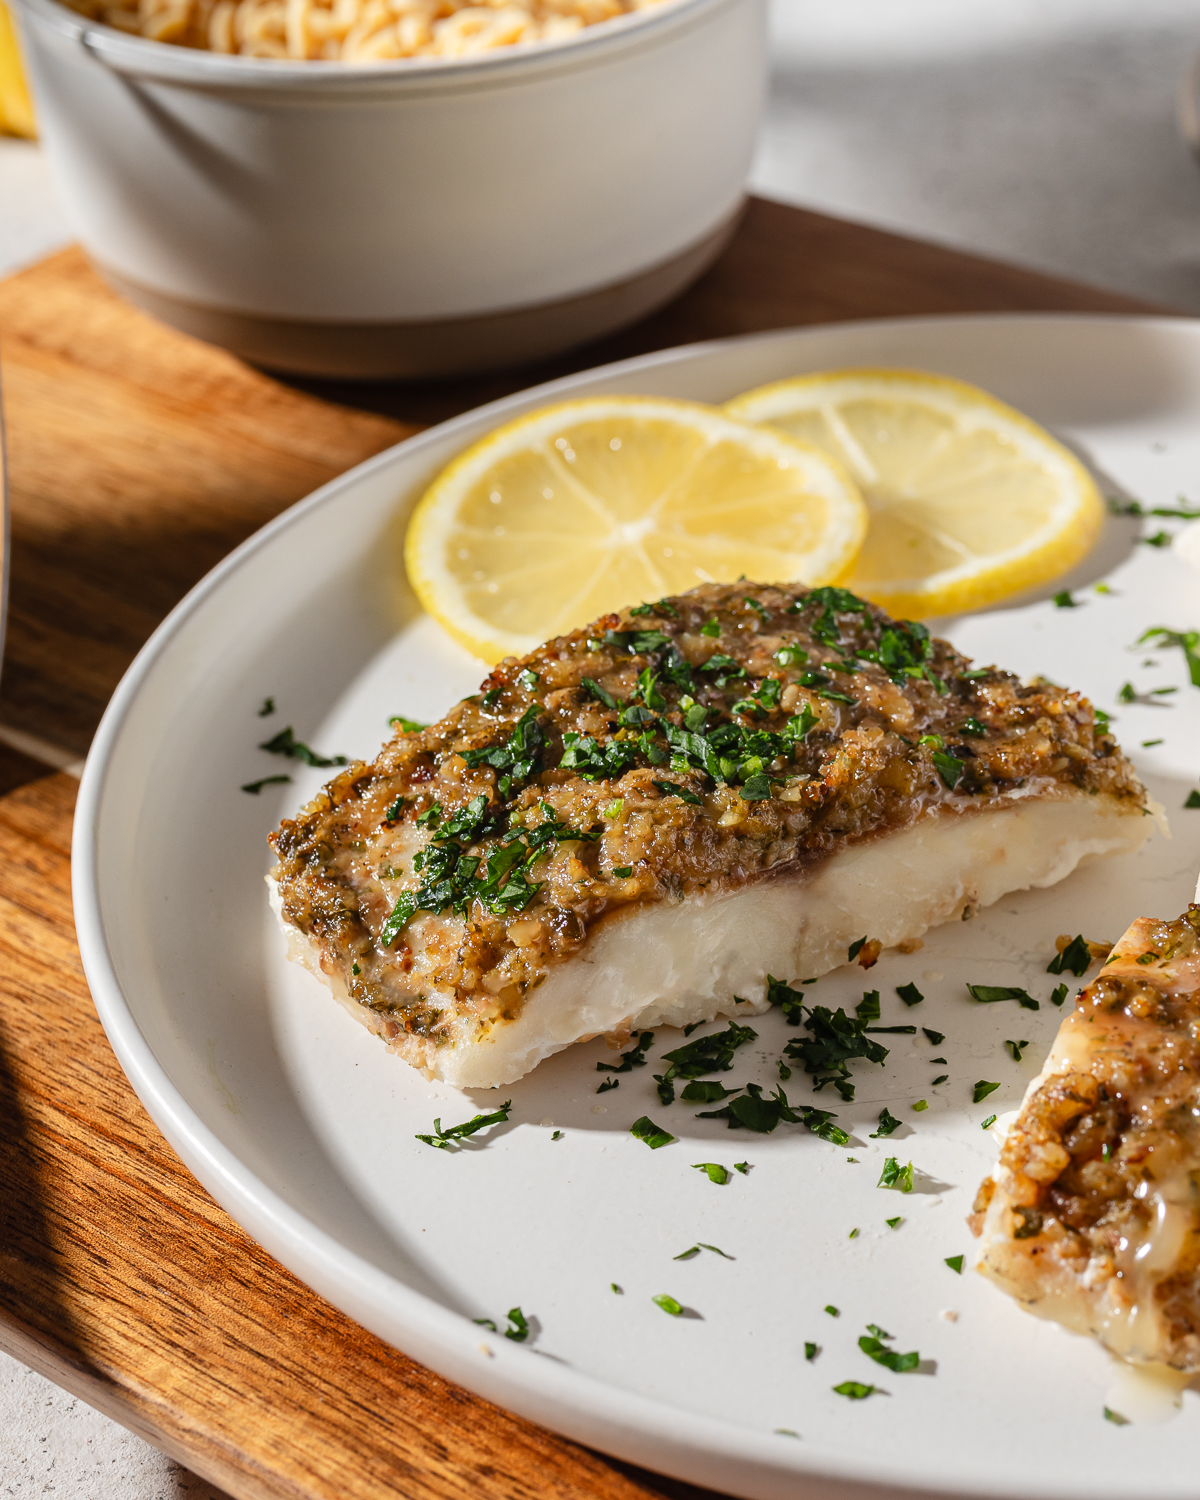 Baked Mediterranean cod on a white plate with lemon.